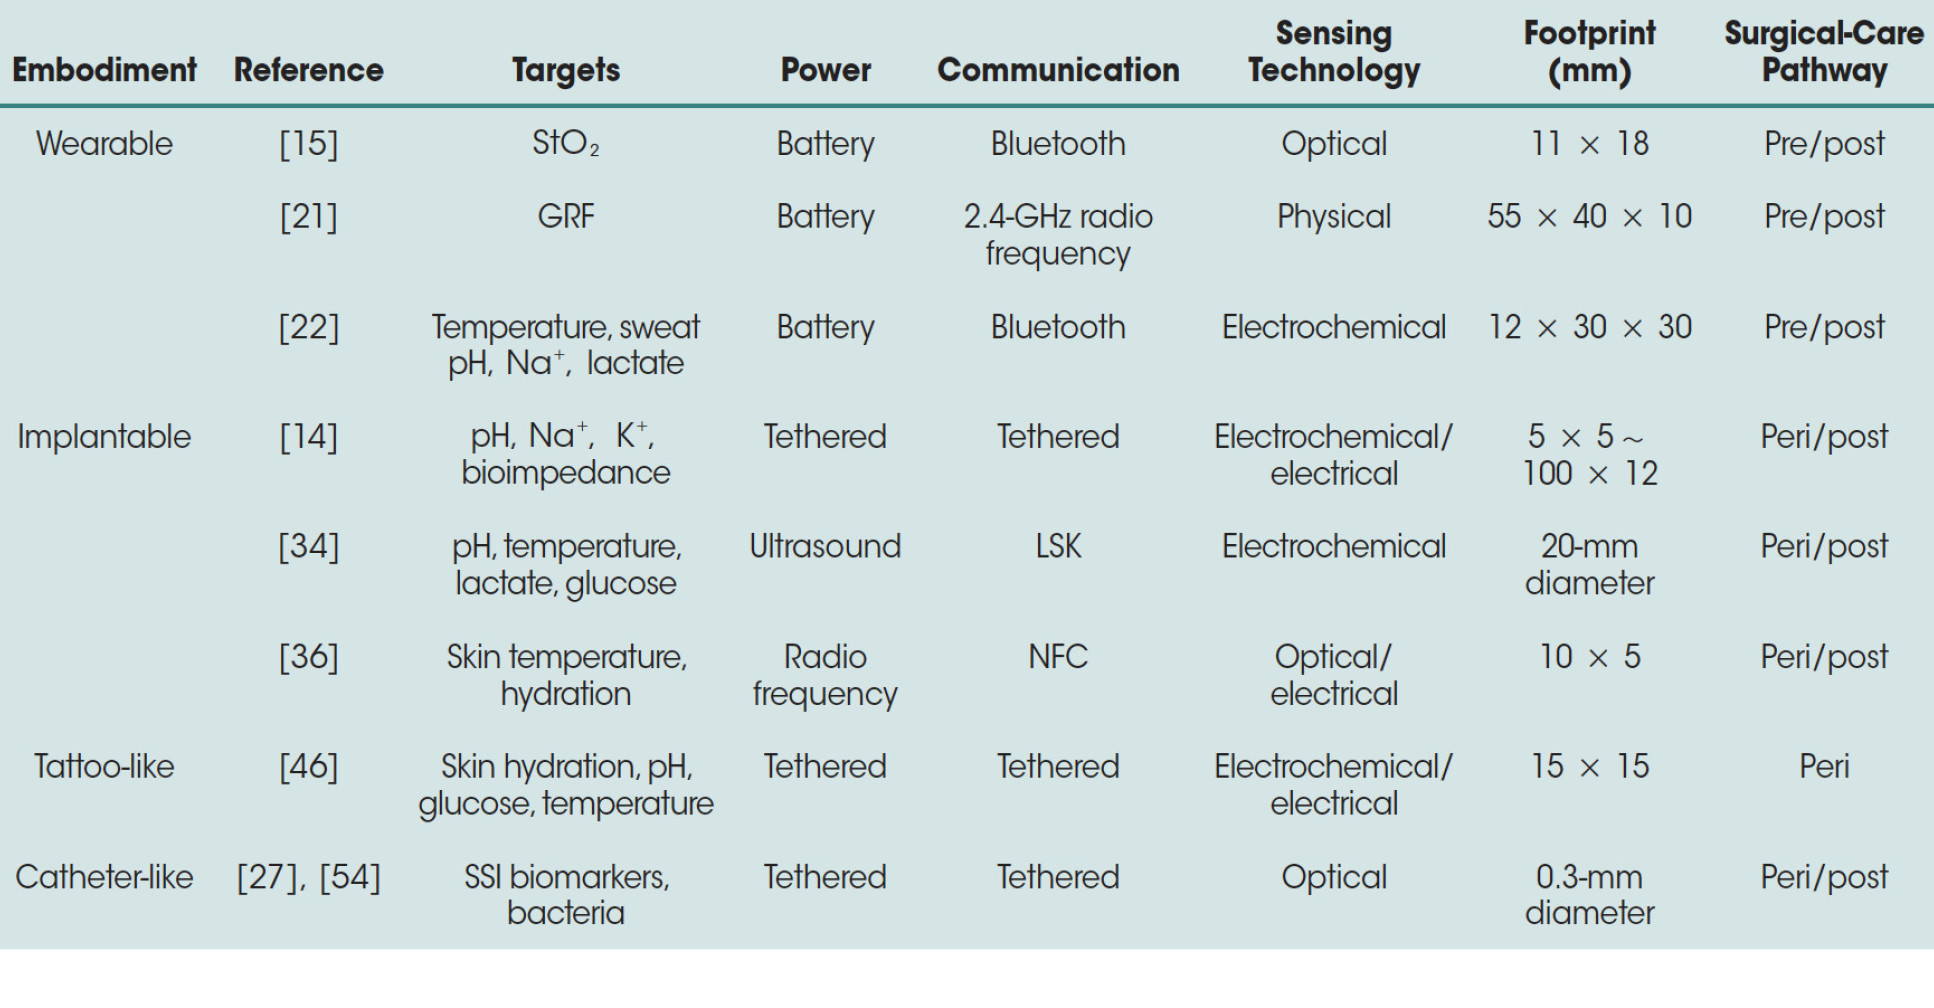 Sensor embodiments and their technical characteristics